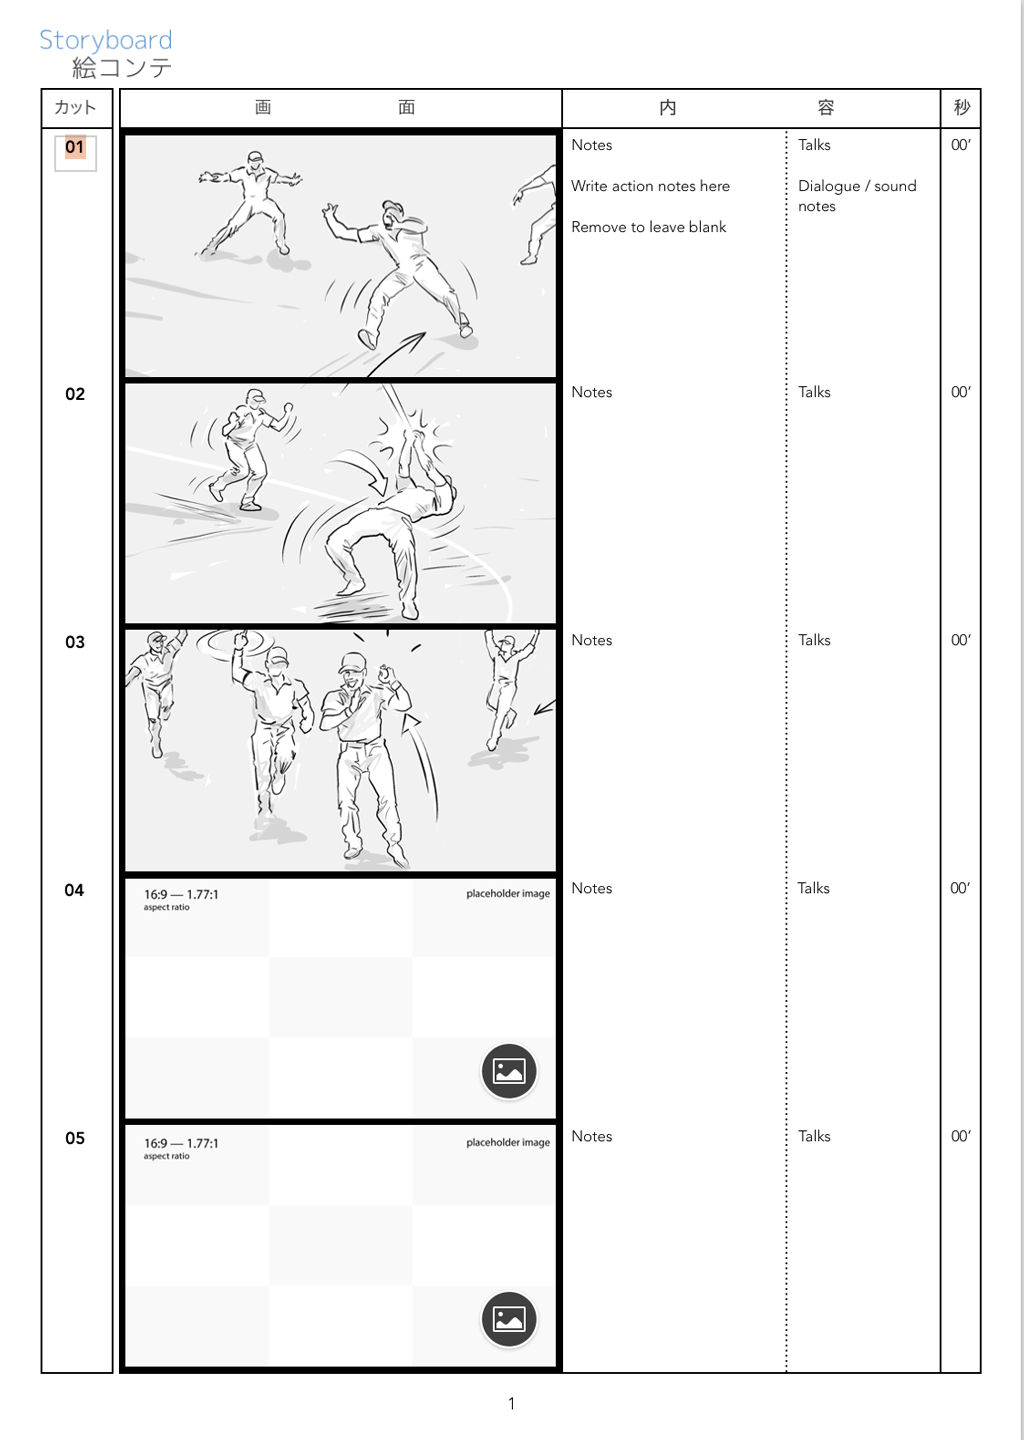 The Artist Draws Anime Comics On Paper Storyboard For The Cartoon The  Illustrator Creates Sketches For The Book Manga Style Stock Photo -  Download Image Now - iStock